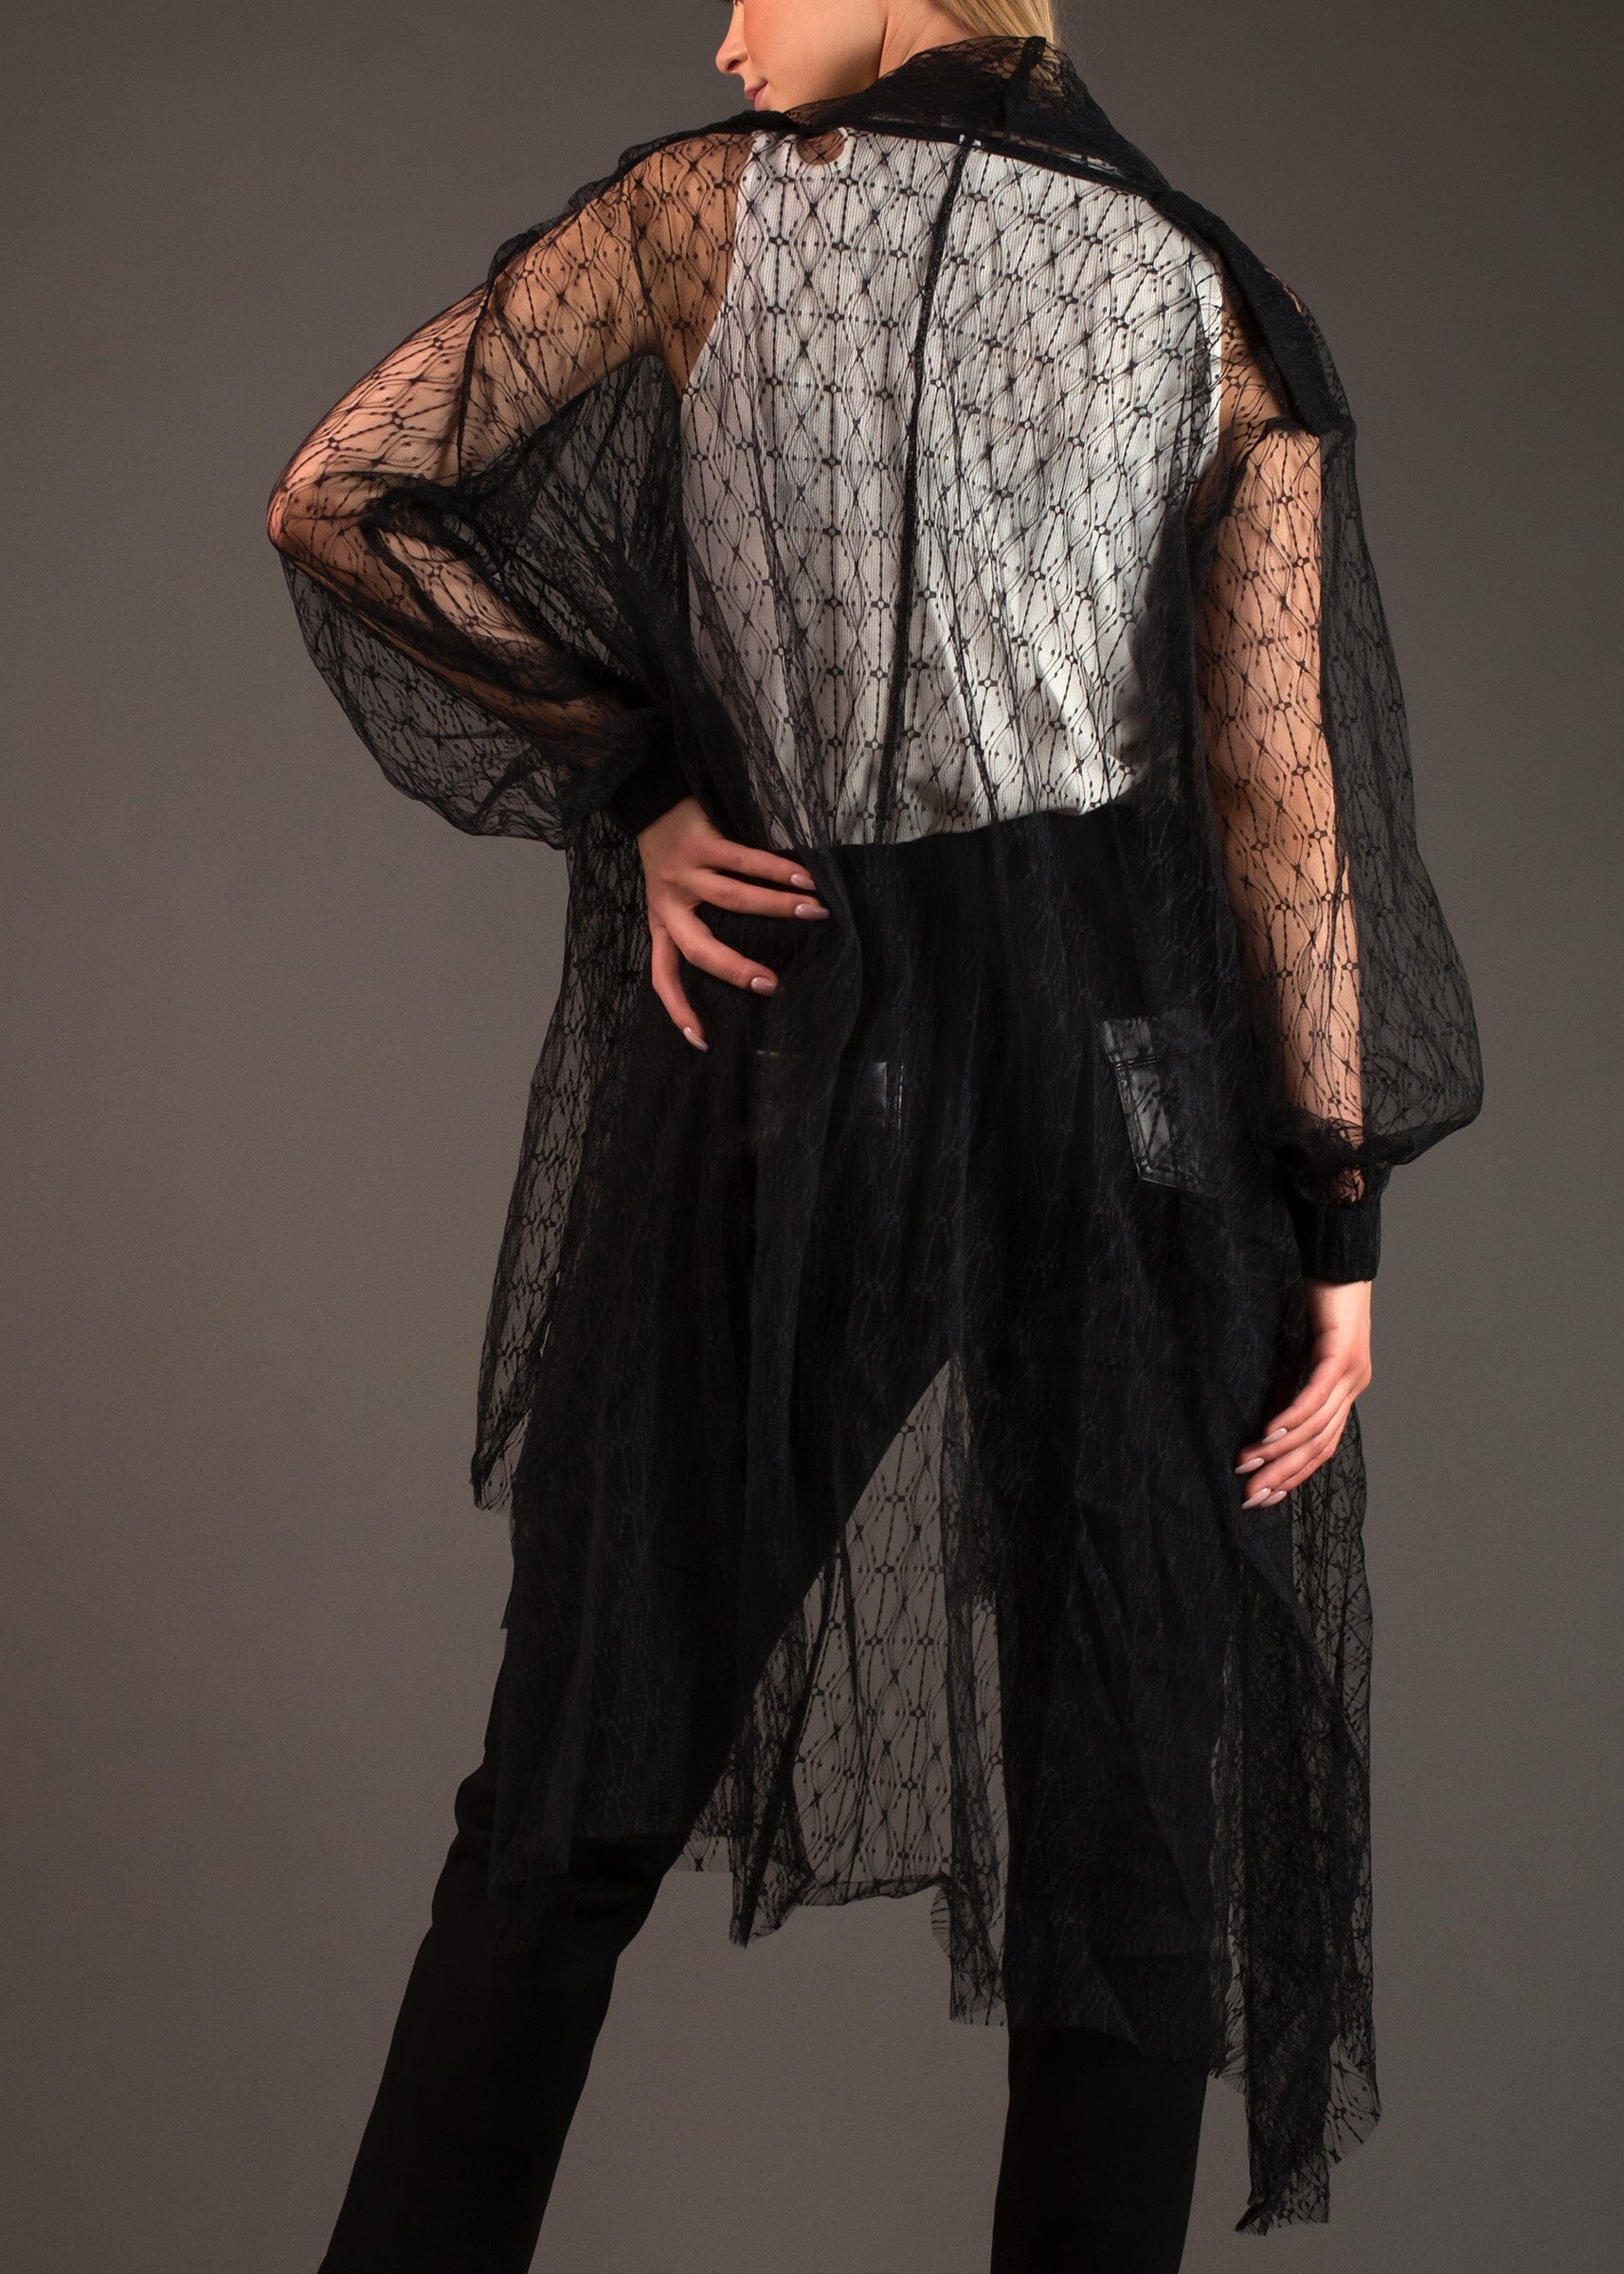 Sheer Patterned Layering Piece Layering Pieces Kate Hewko 